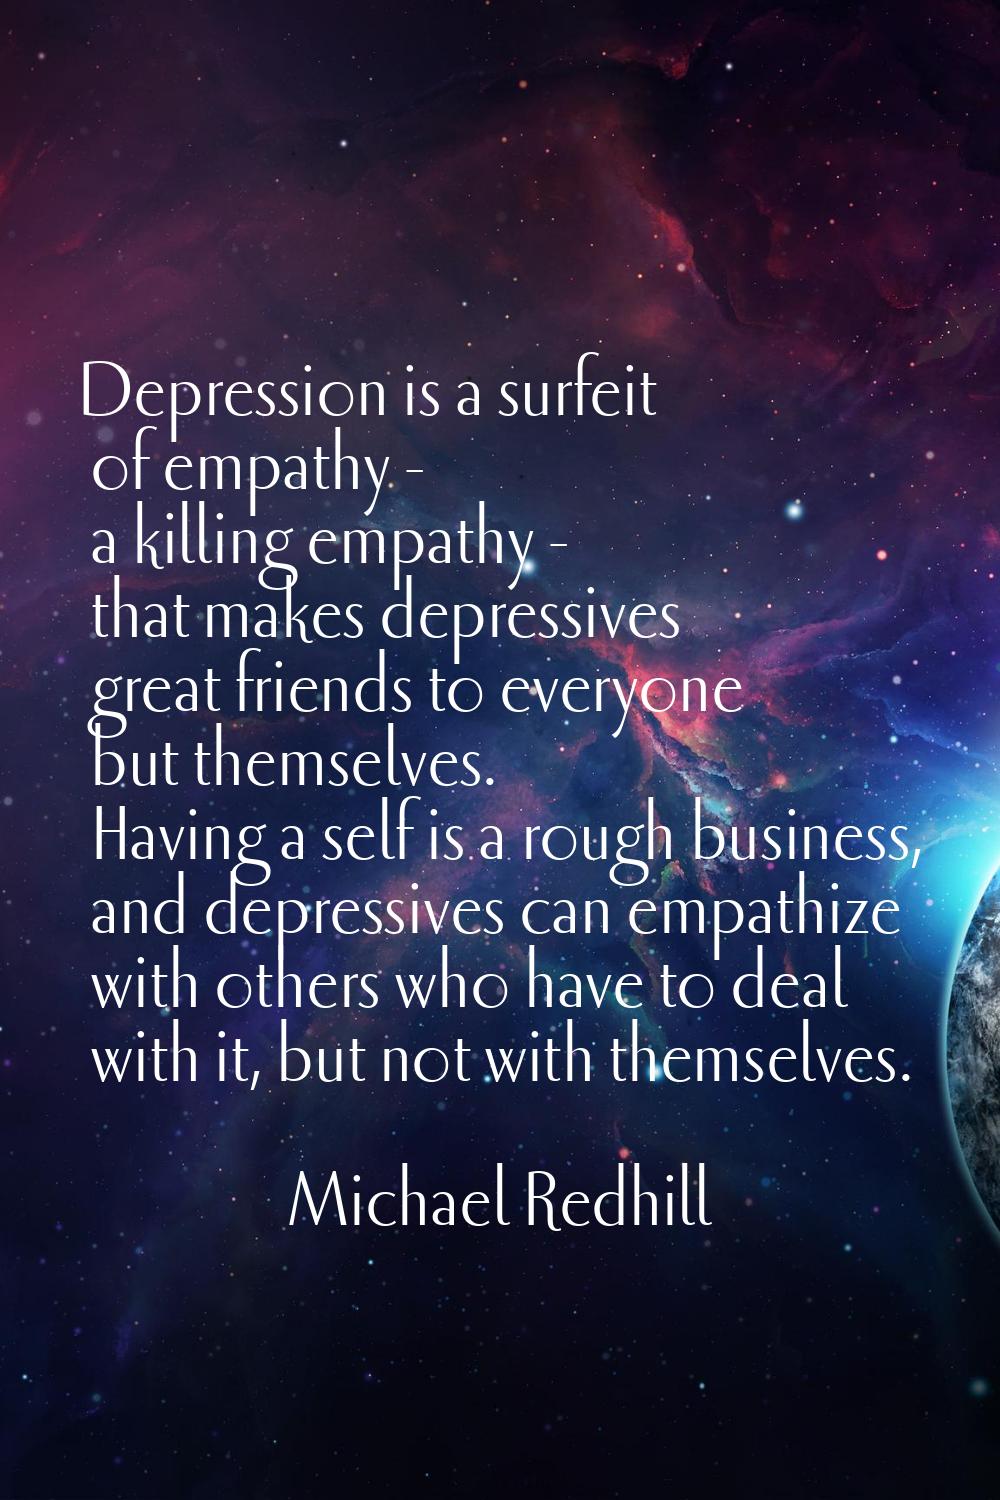 Depression is a surfeit of empathy - a killing empathy - that makes depressives great friends to ev